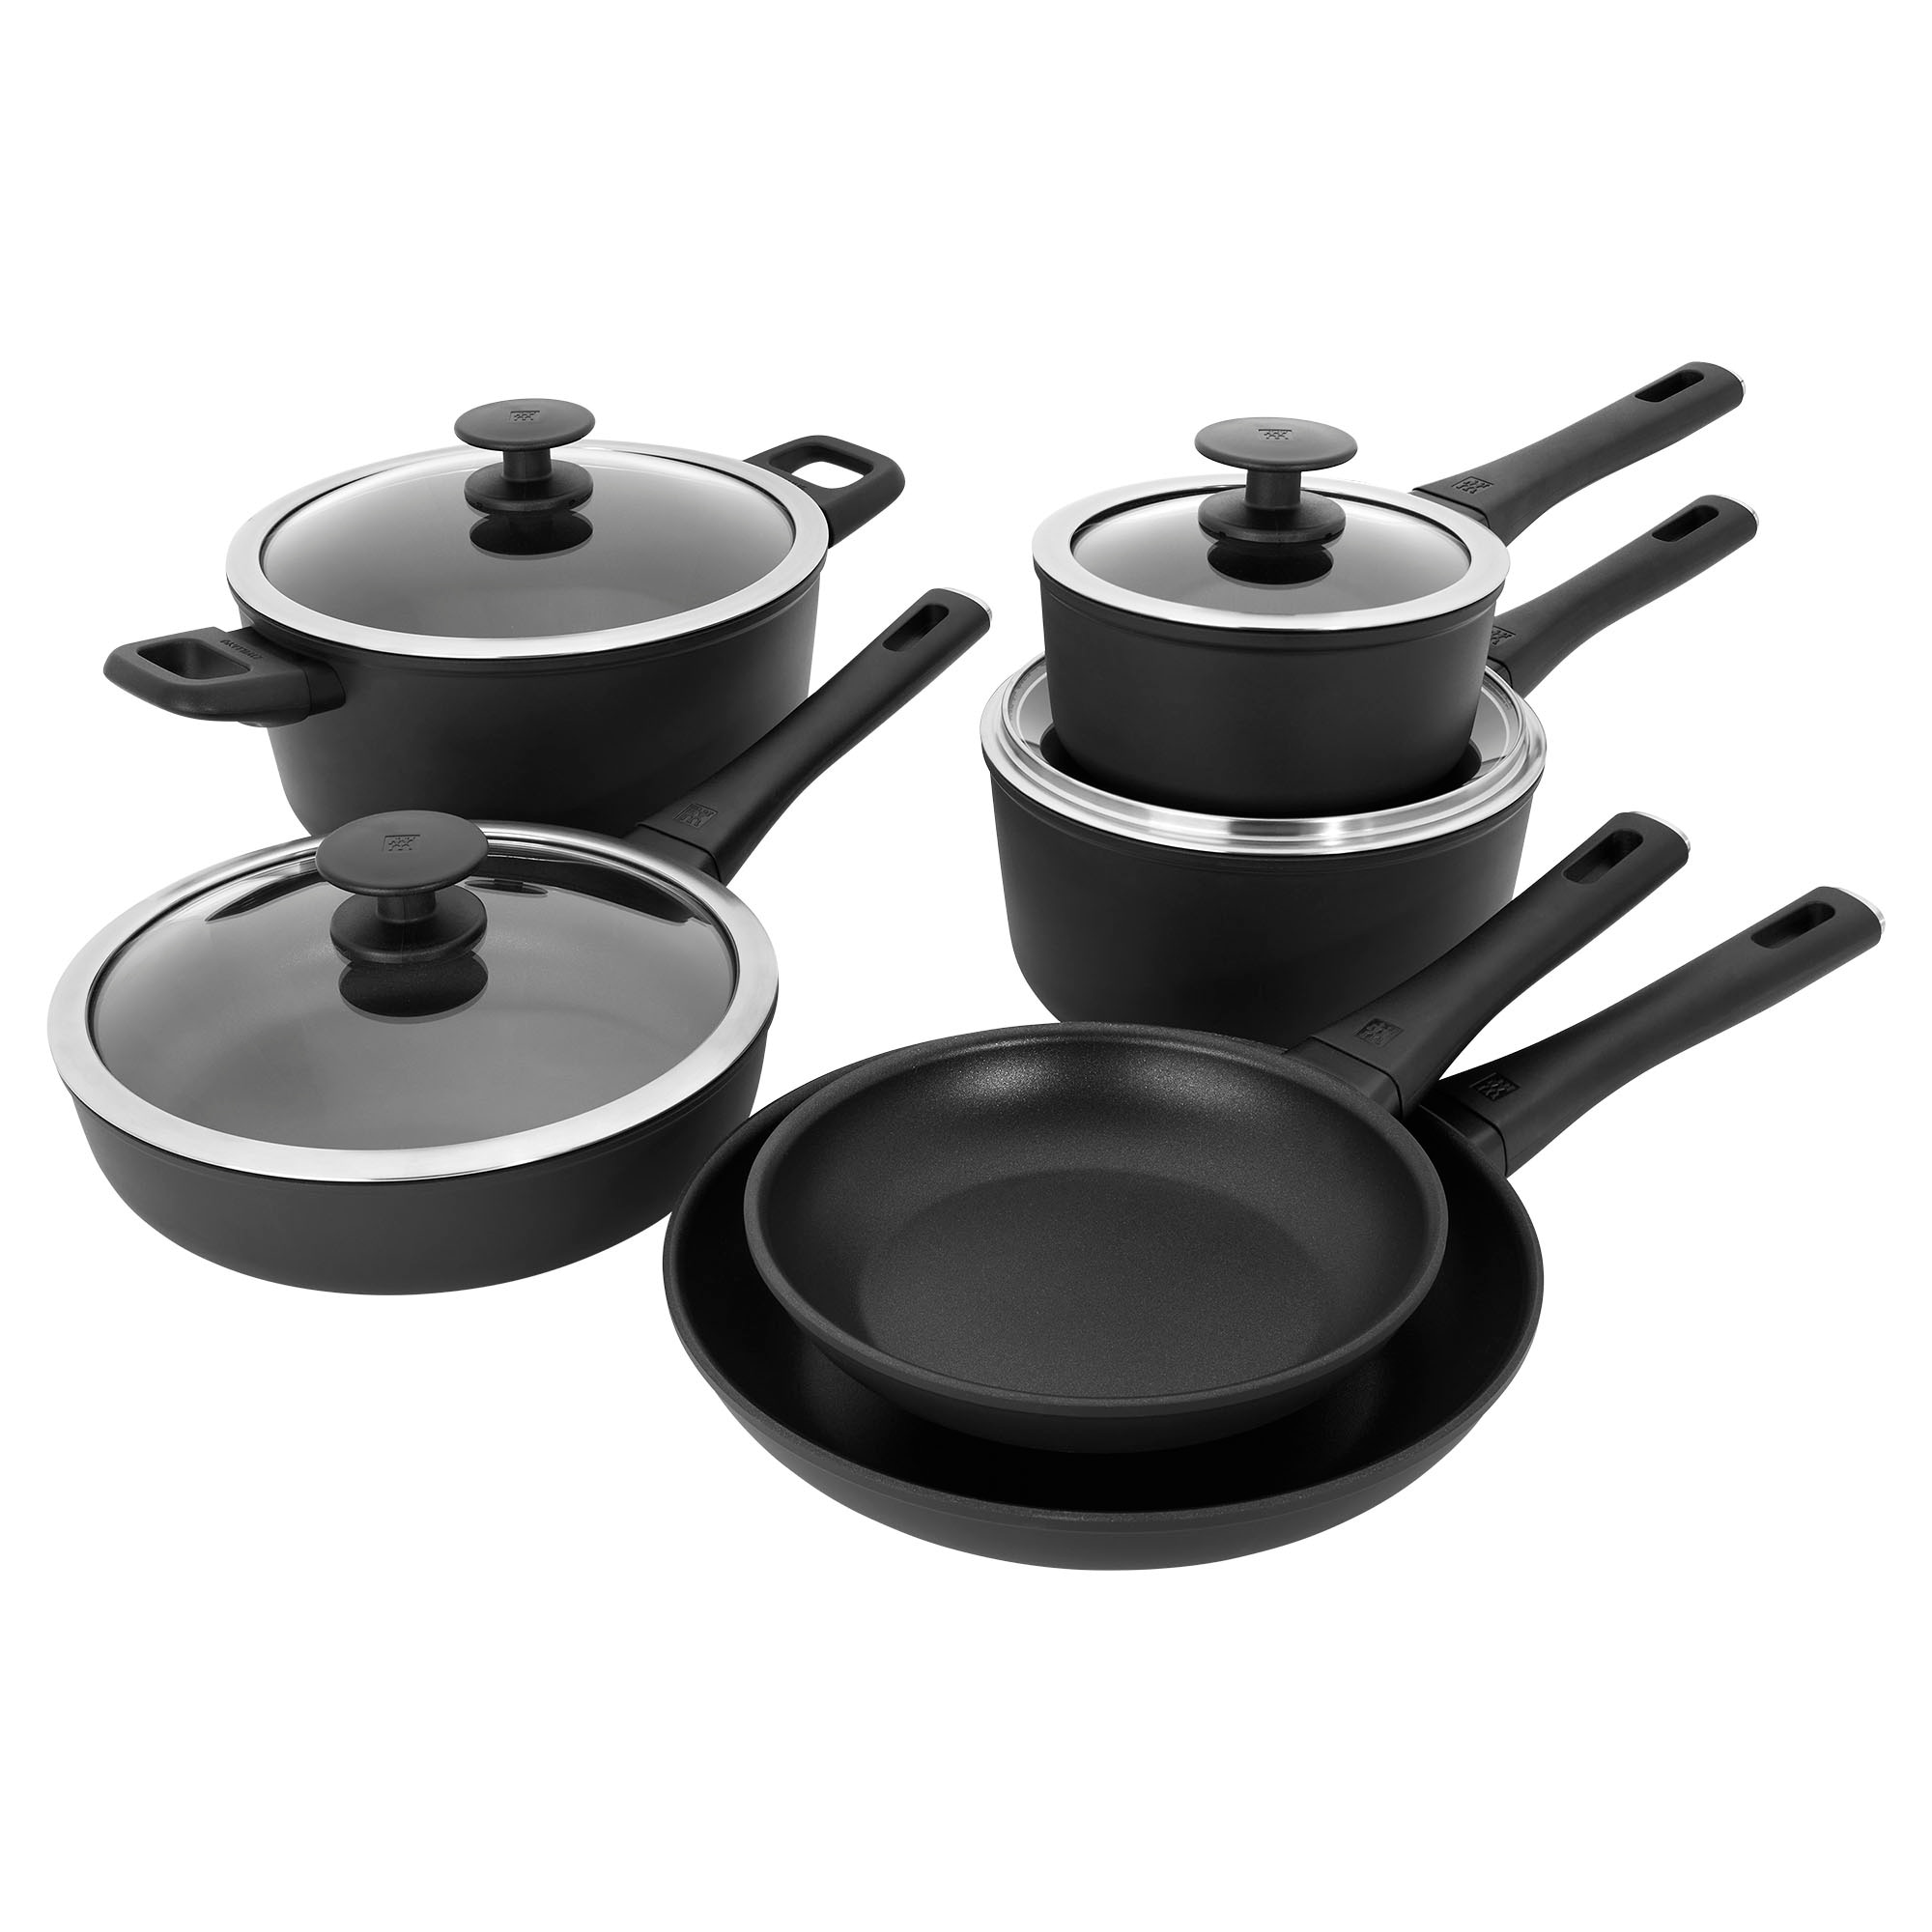 https://ak1.ostkcdn.com/images/products/is/images/direct/3ce1ebb31fda5b2b45fbeb2b10982248aaeeacca/ZWILLING-Madura-Plus-Forged-10-pc-Aluminum-Nonstick-Cookware-Set.jpg